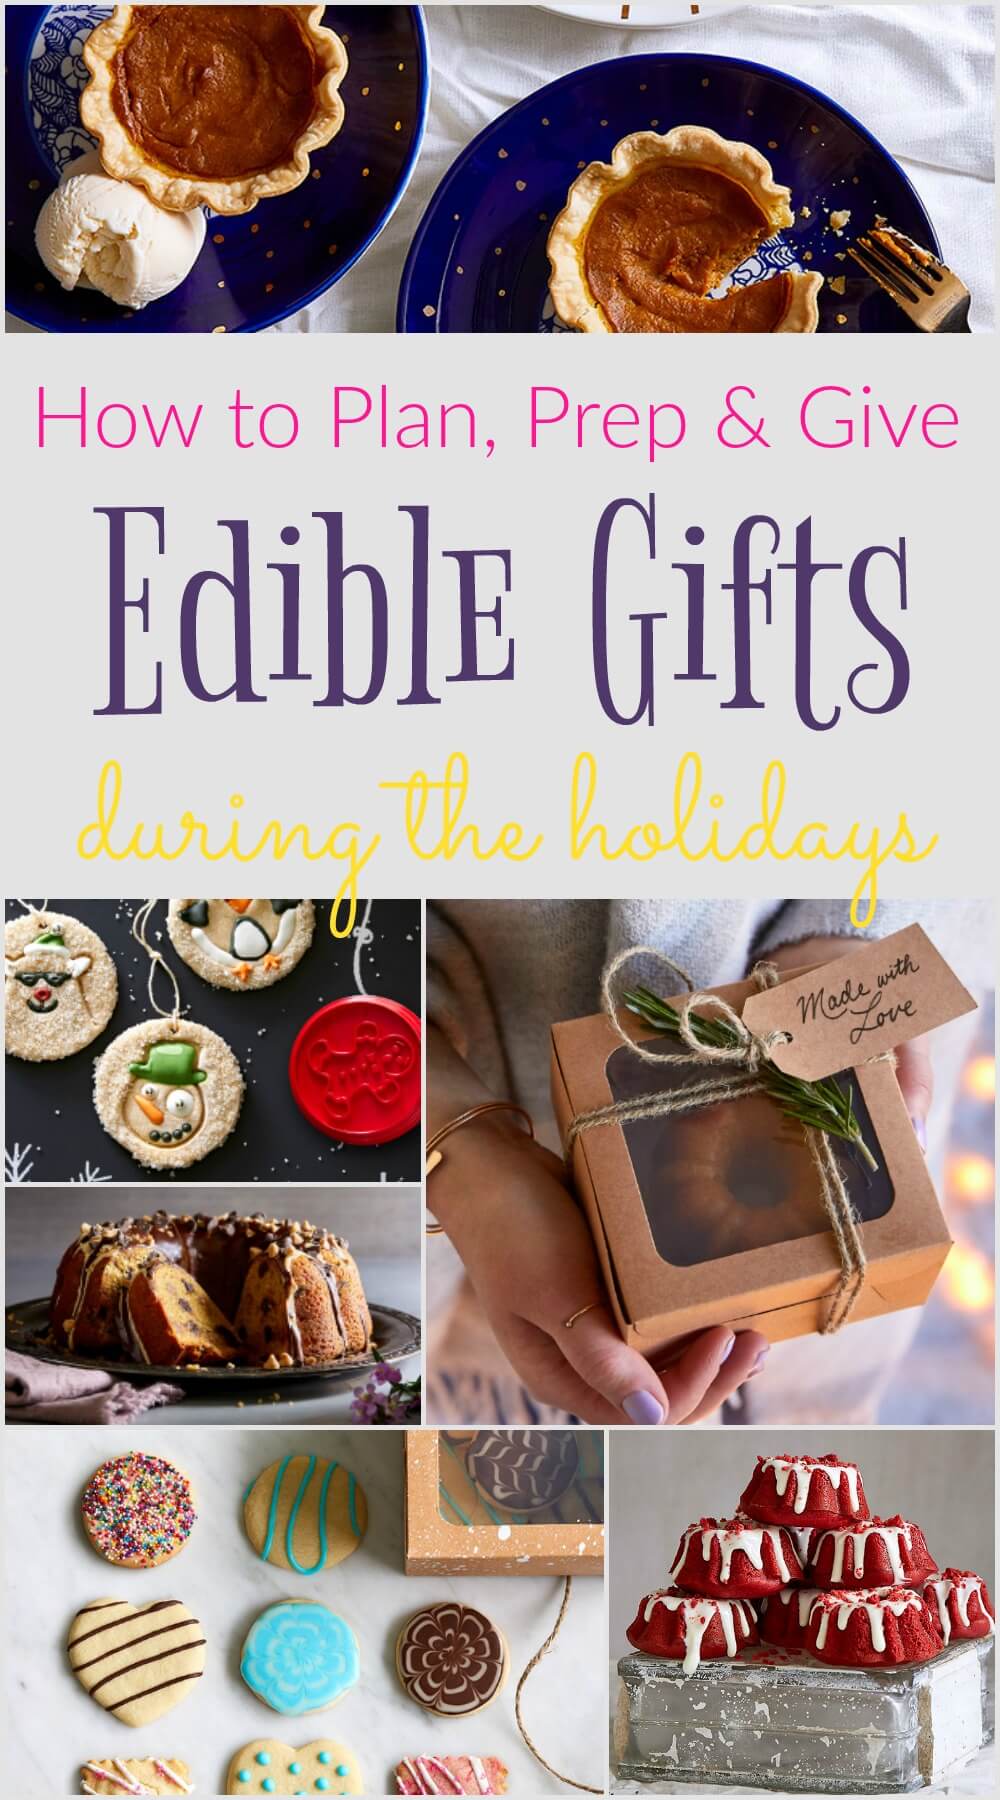 I've always loved the idea of homemade gifts, but I'm not crafty, and I don't have a lot of time. Edible gifts are the perfect easy DIY, low cost way to show you care. Great for kids, teachers, neighbors, and more!